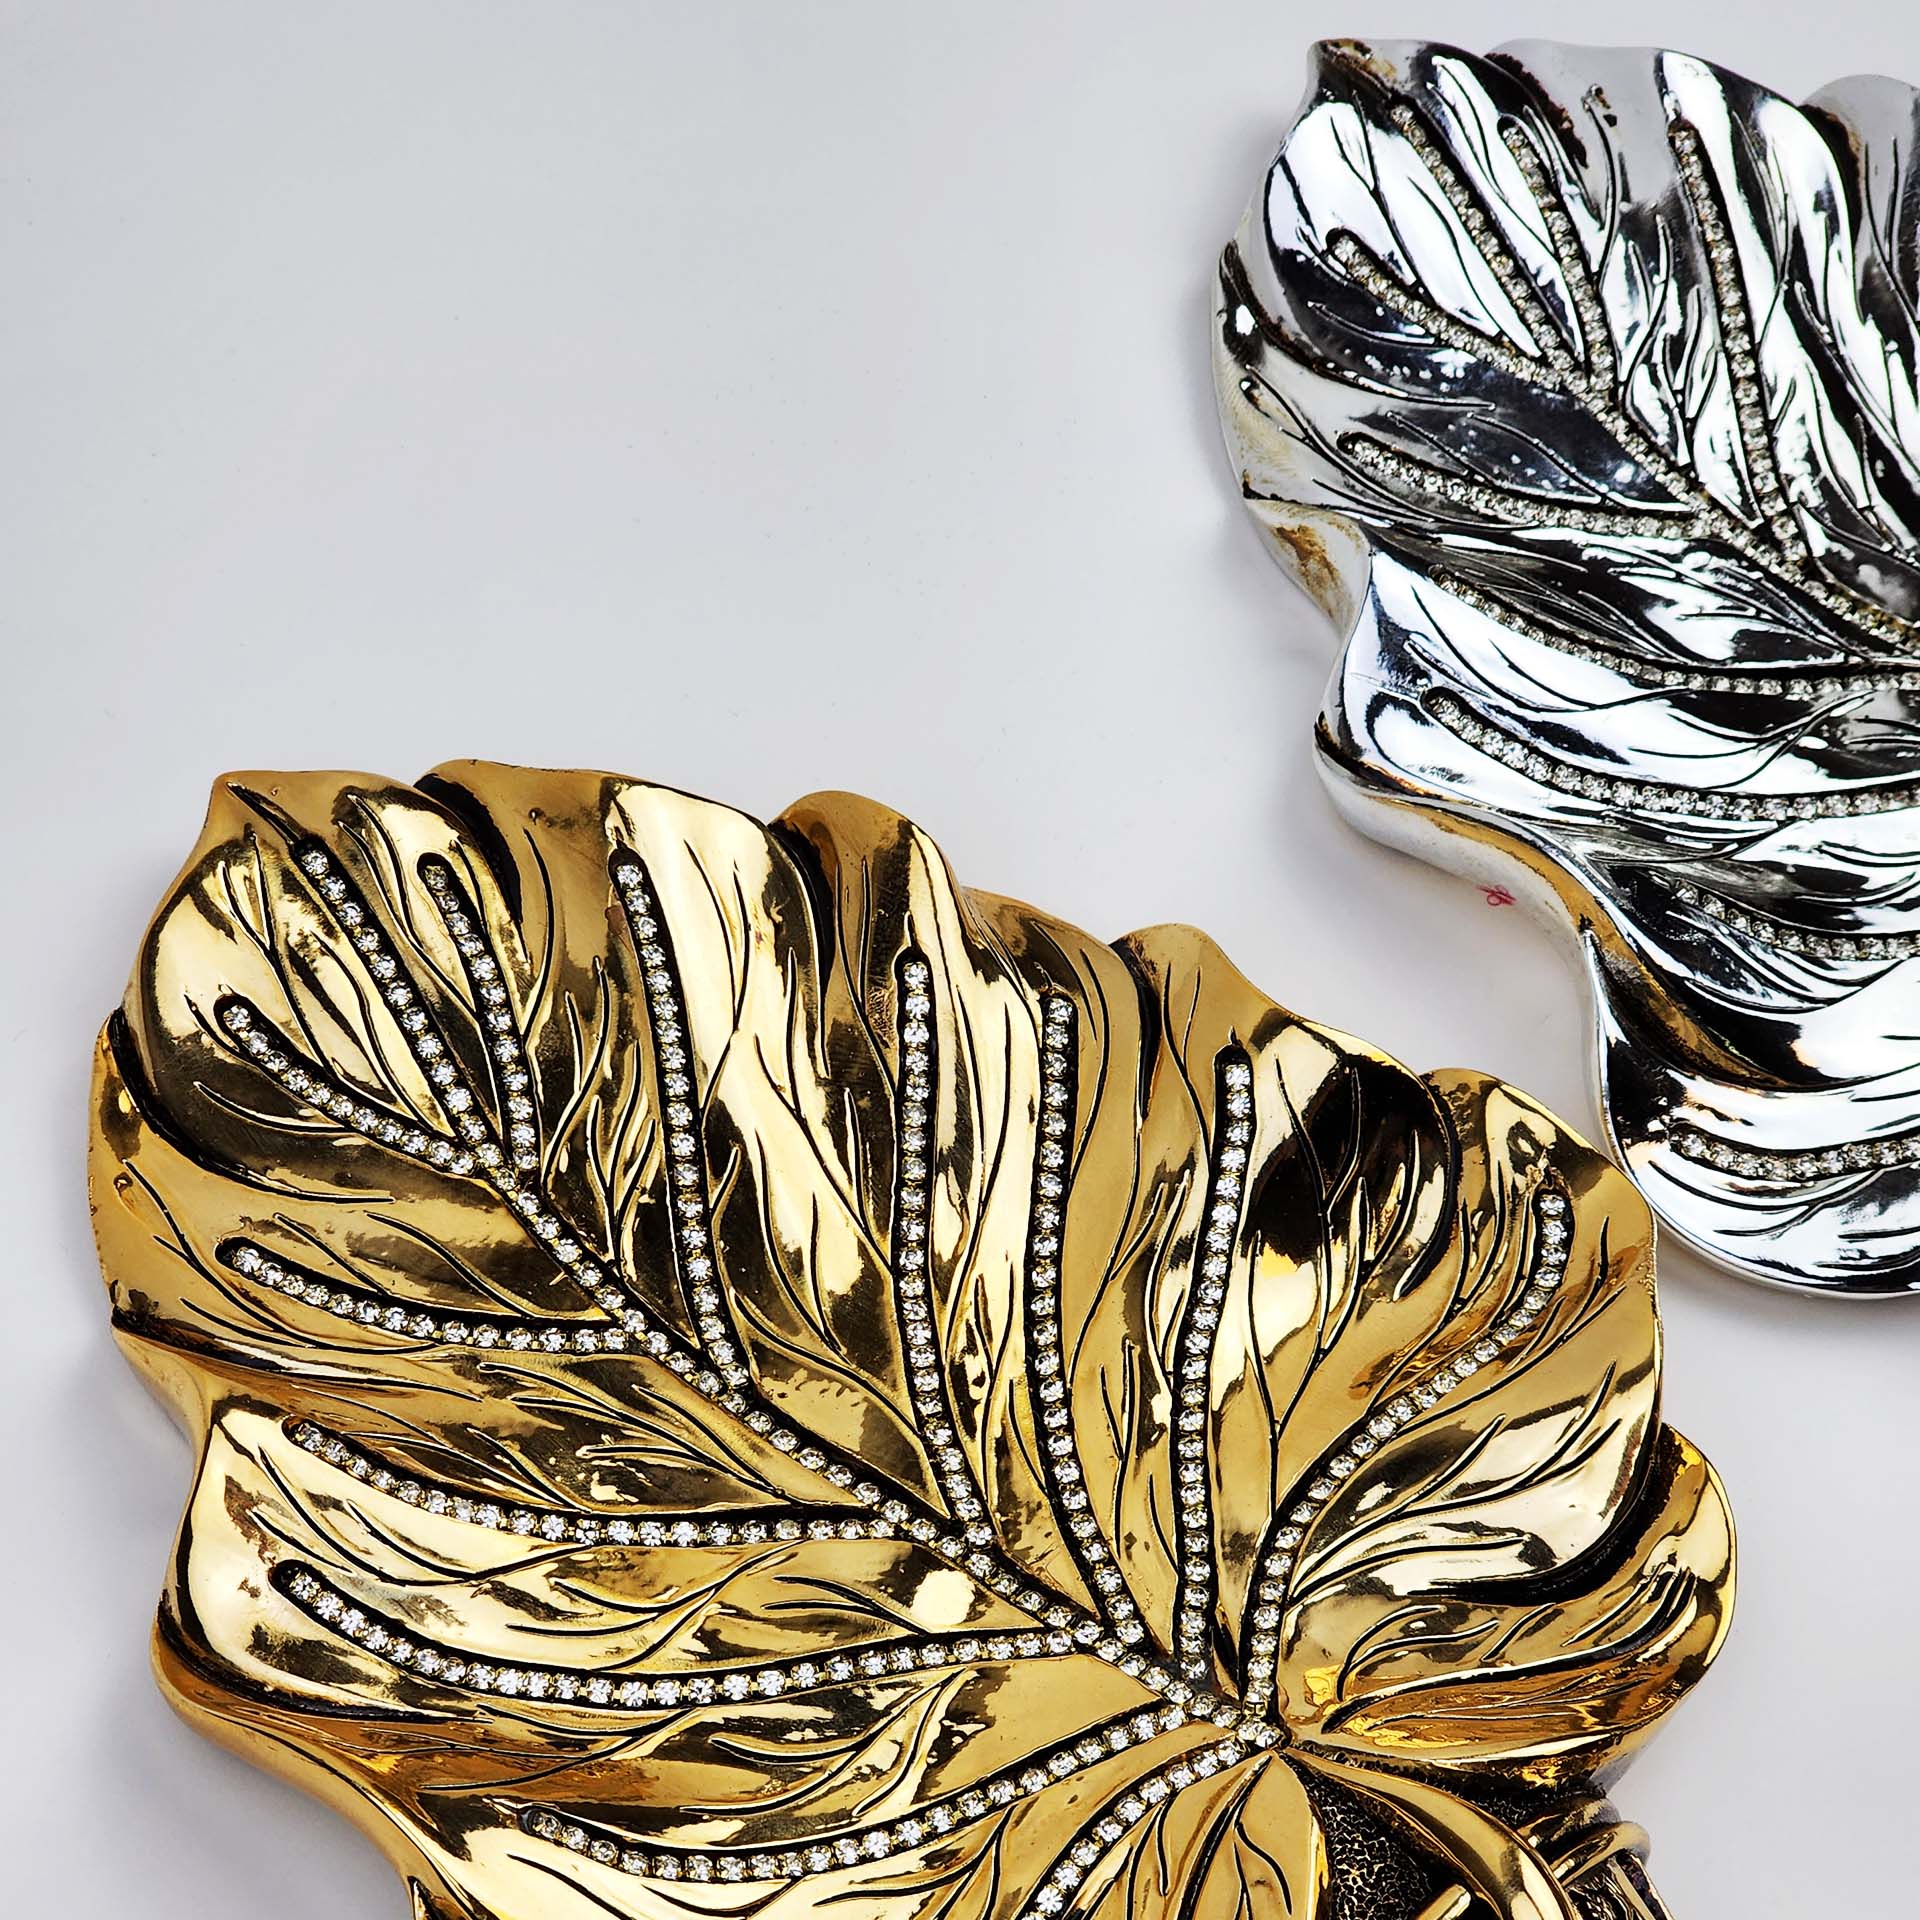 Leafe of Heart 2 pcs - Gold\Silver